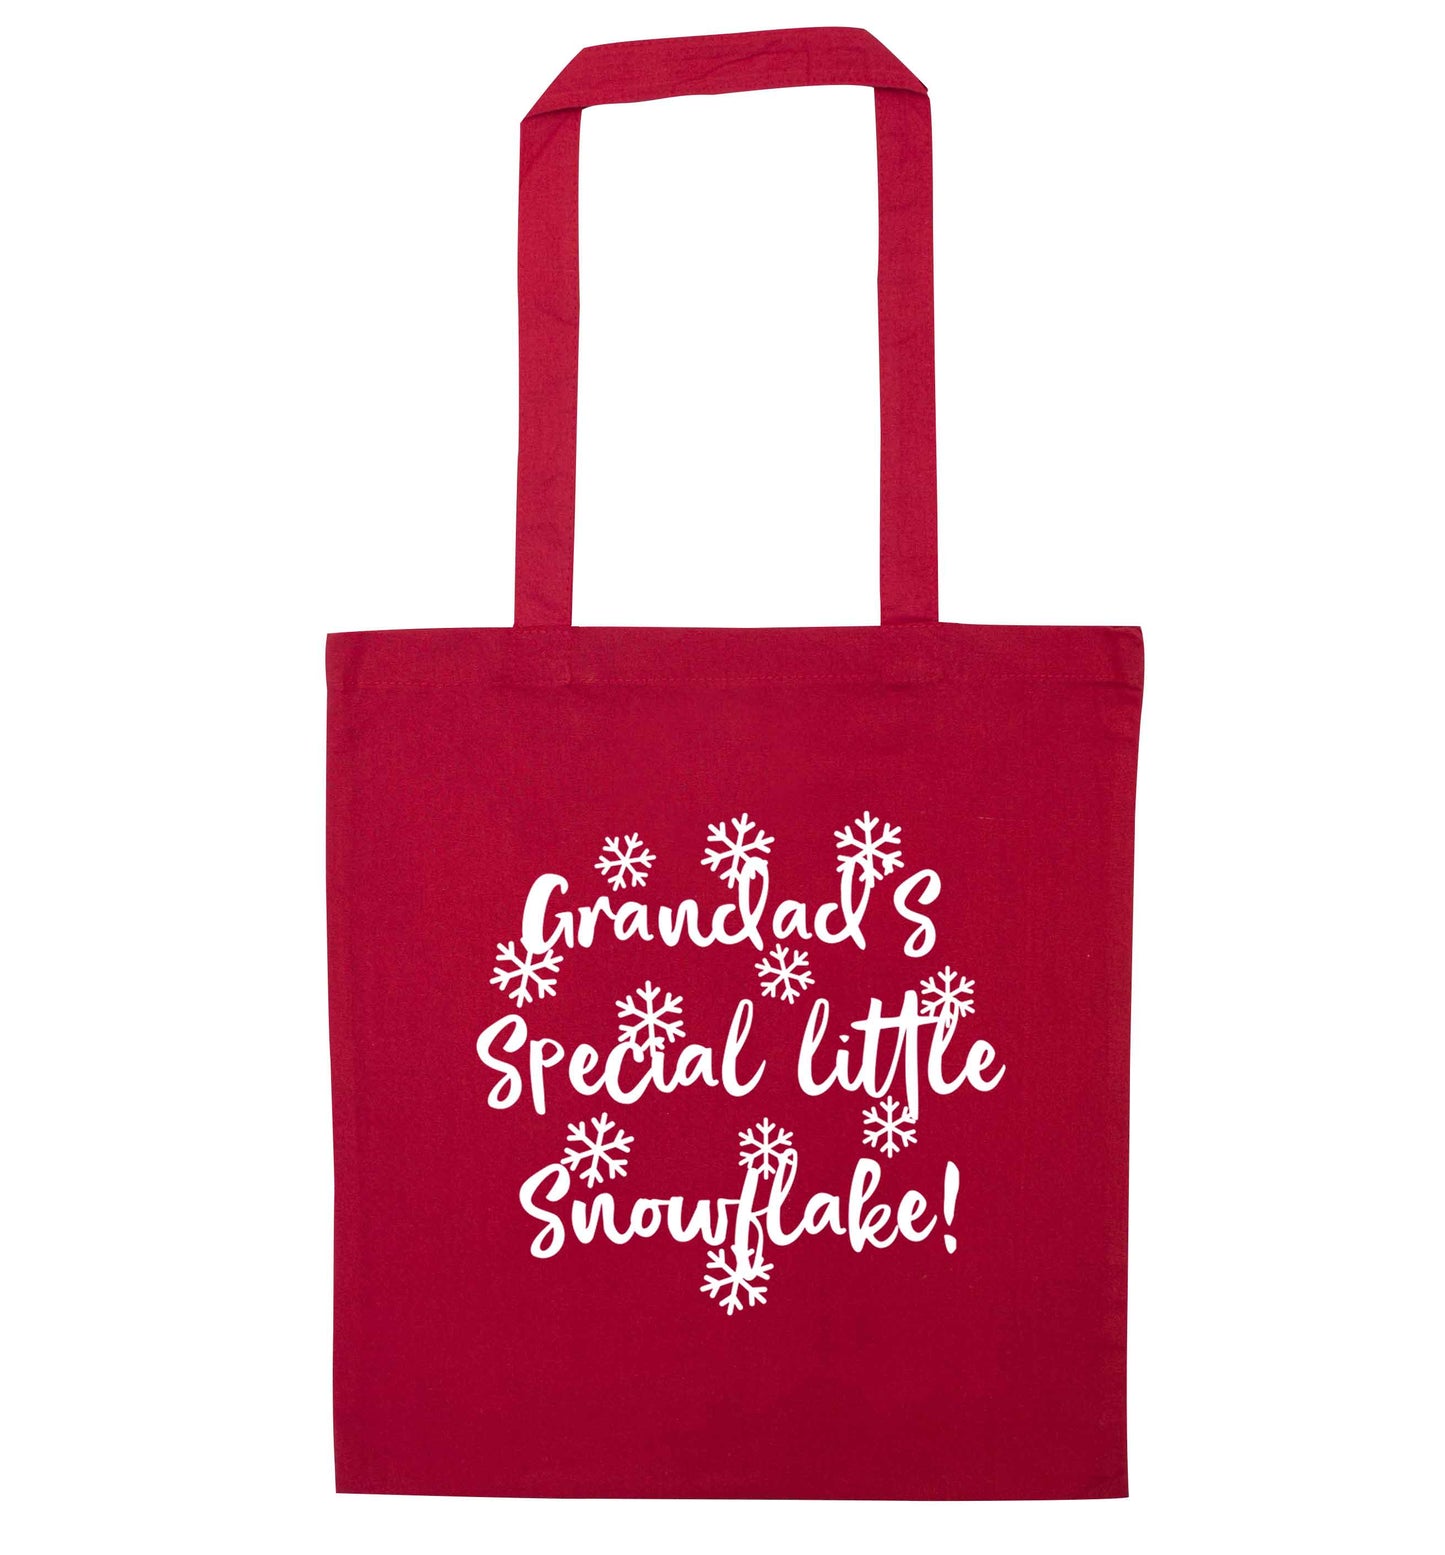 Grandad's special little snowflake red tote bag